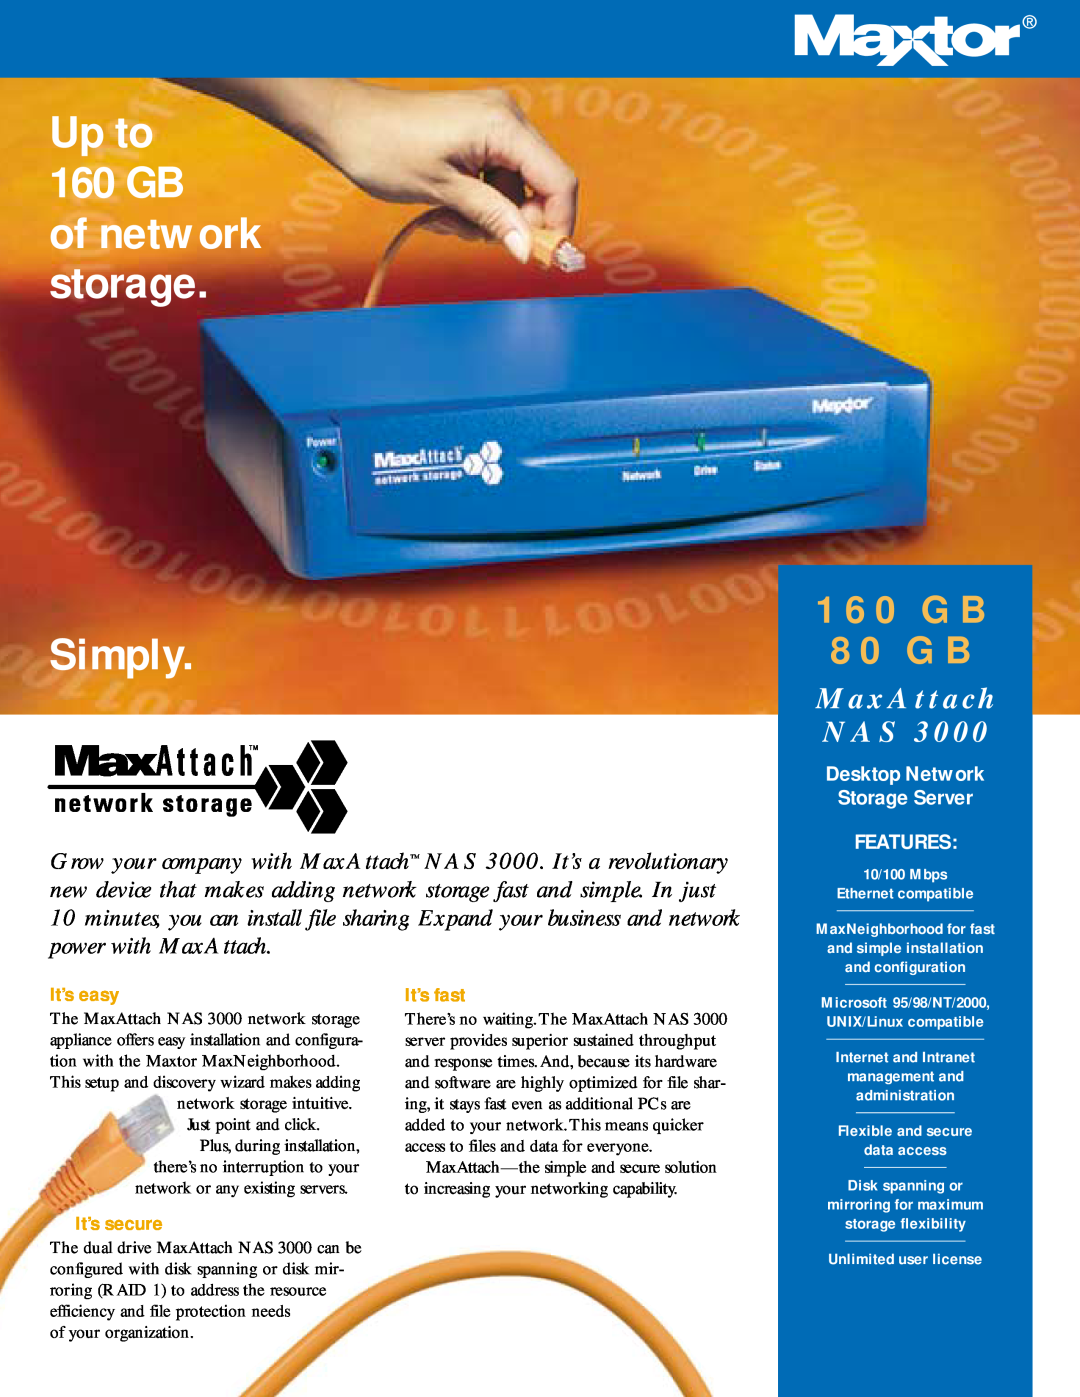 Seagate NAS 3000 manual It’s easy, It’s secure, It’s fast, Up to 160 GB, Simply, of network storage, 160 GB 80 GB 